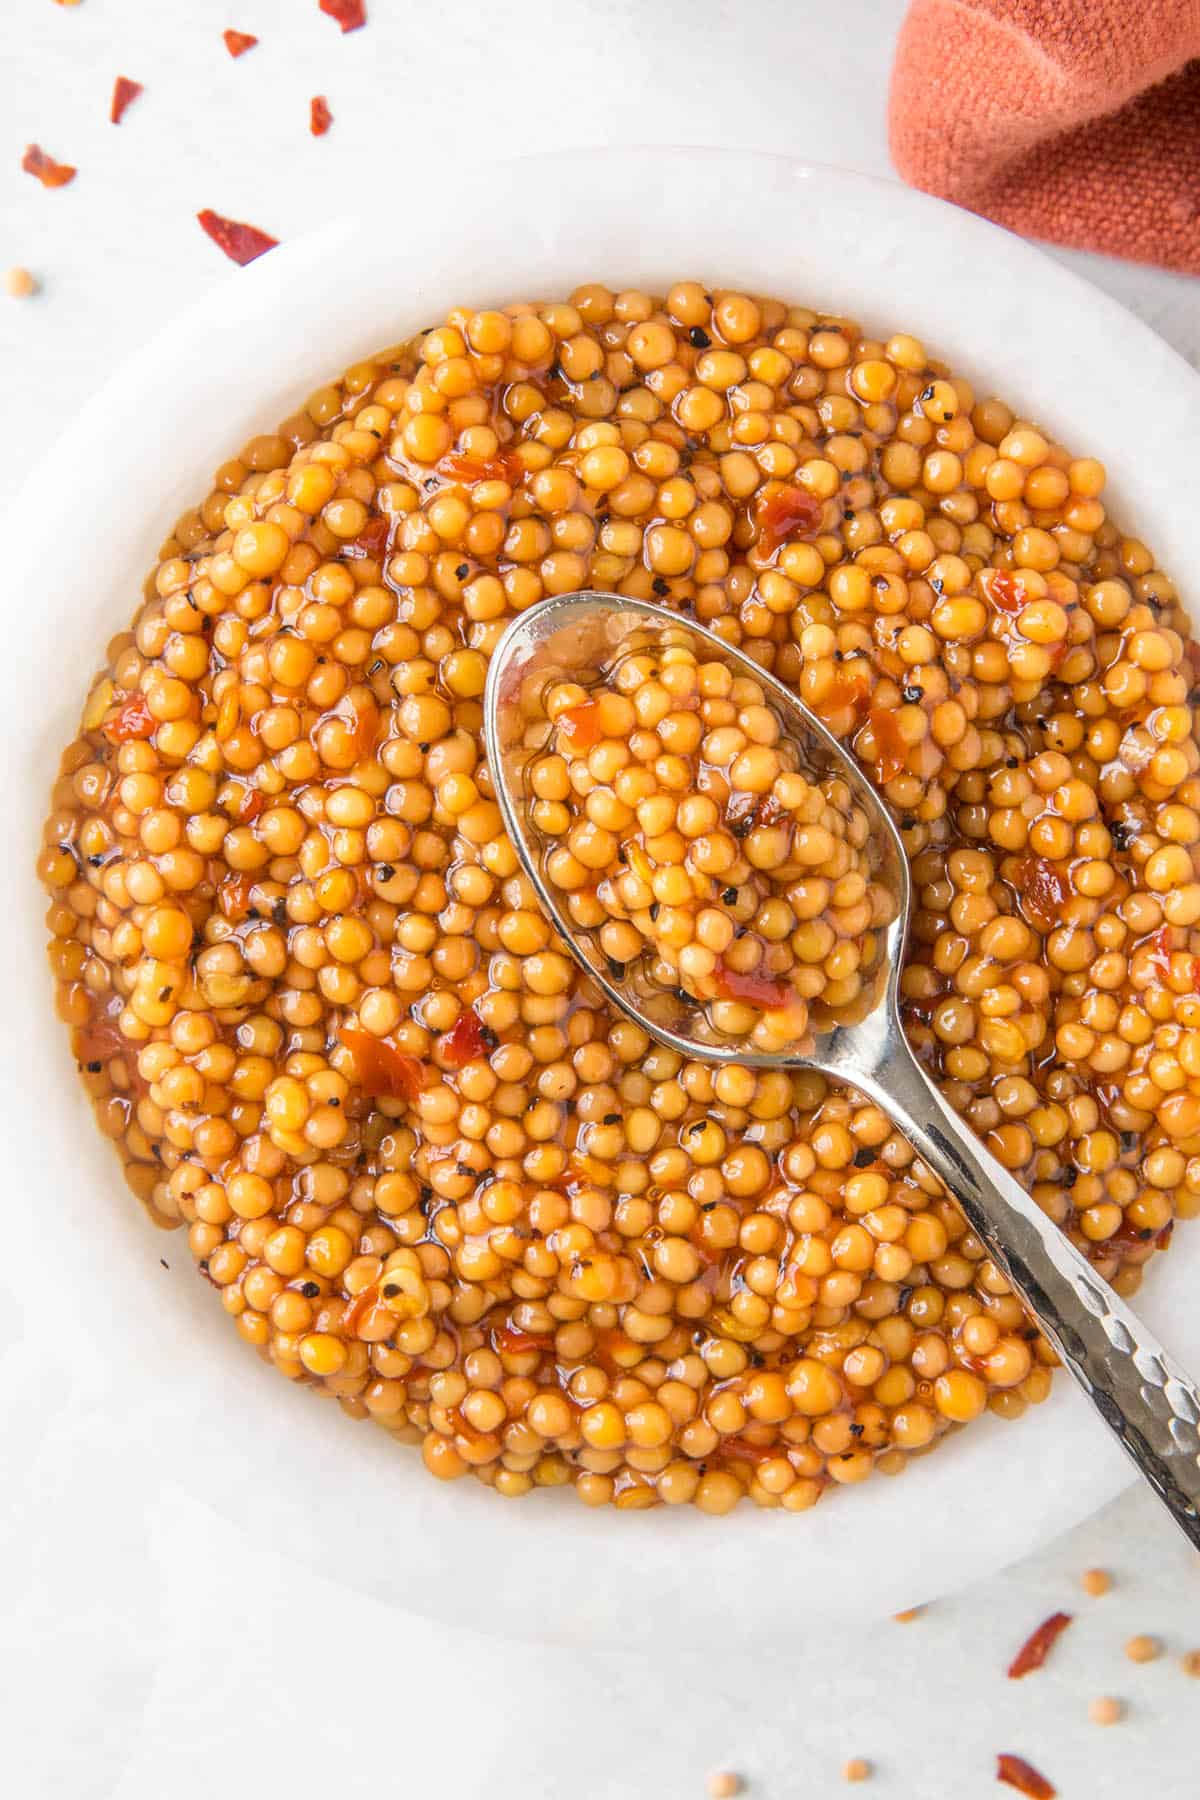 A spoonful of the pickled mustard seeds